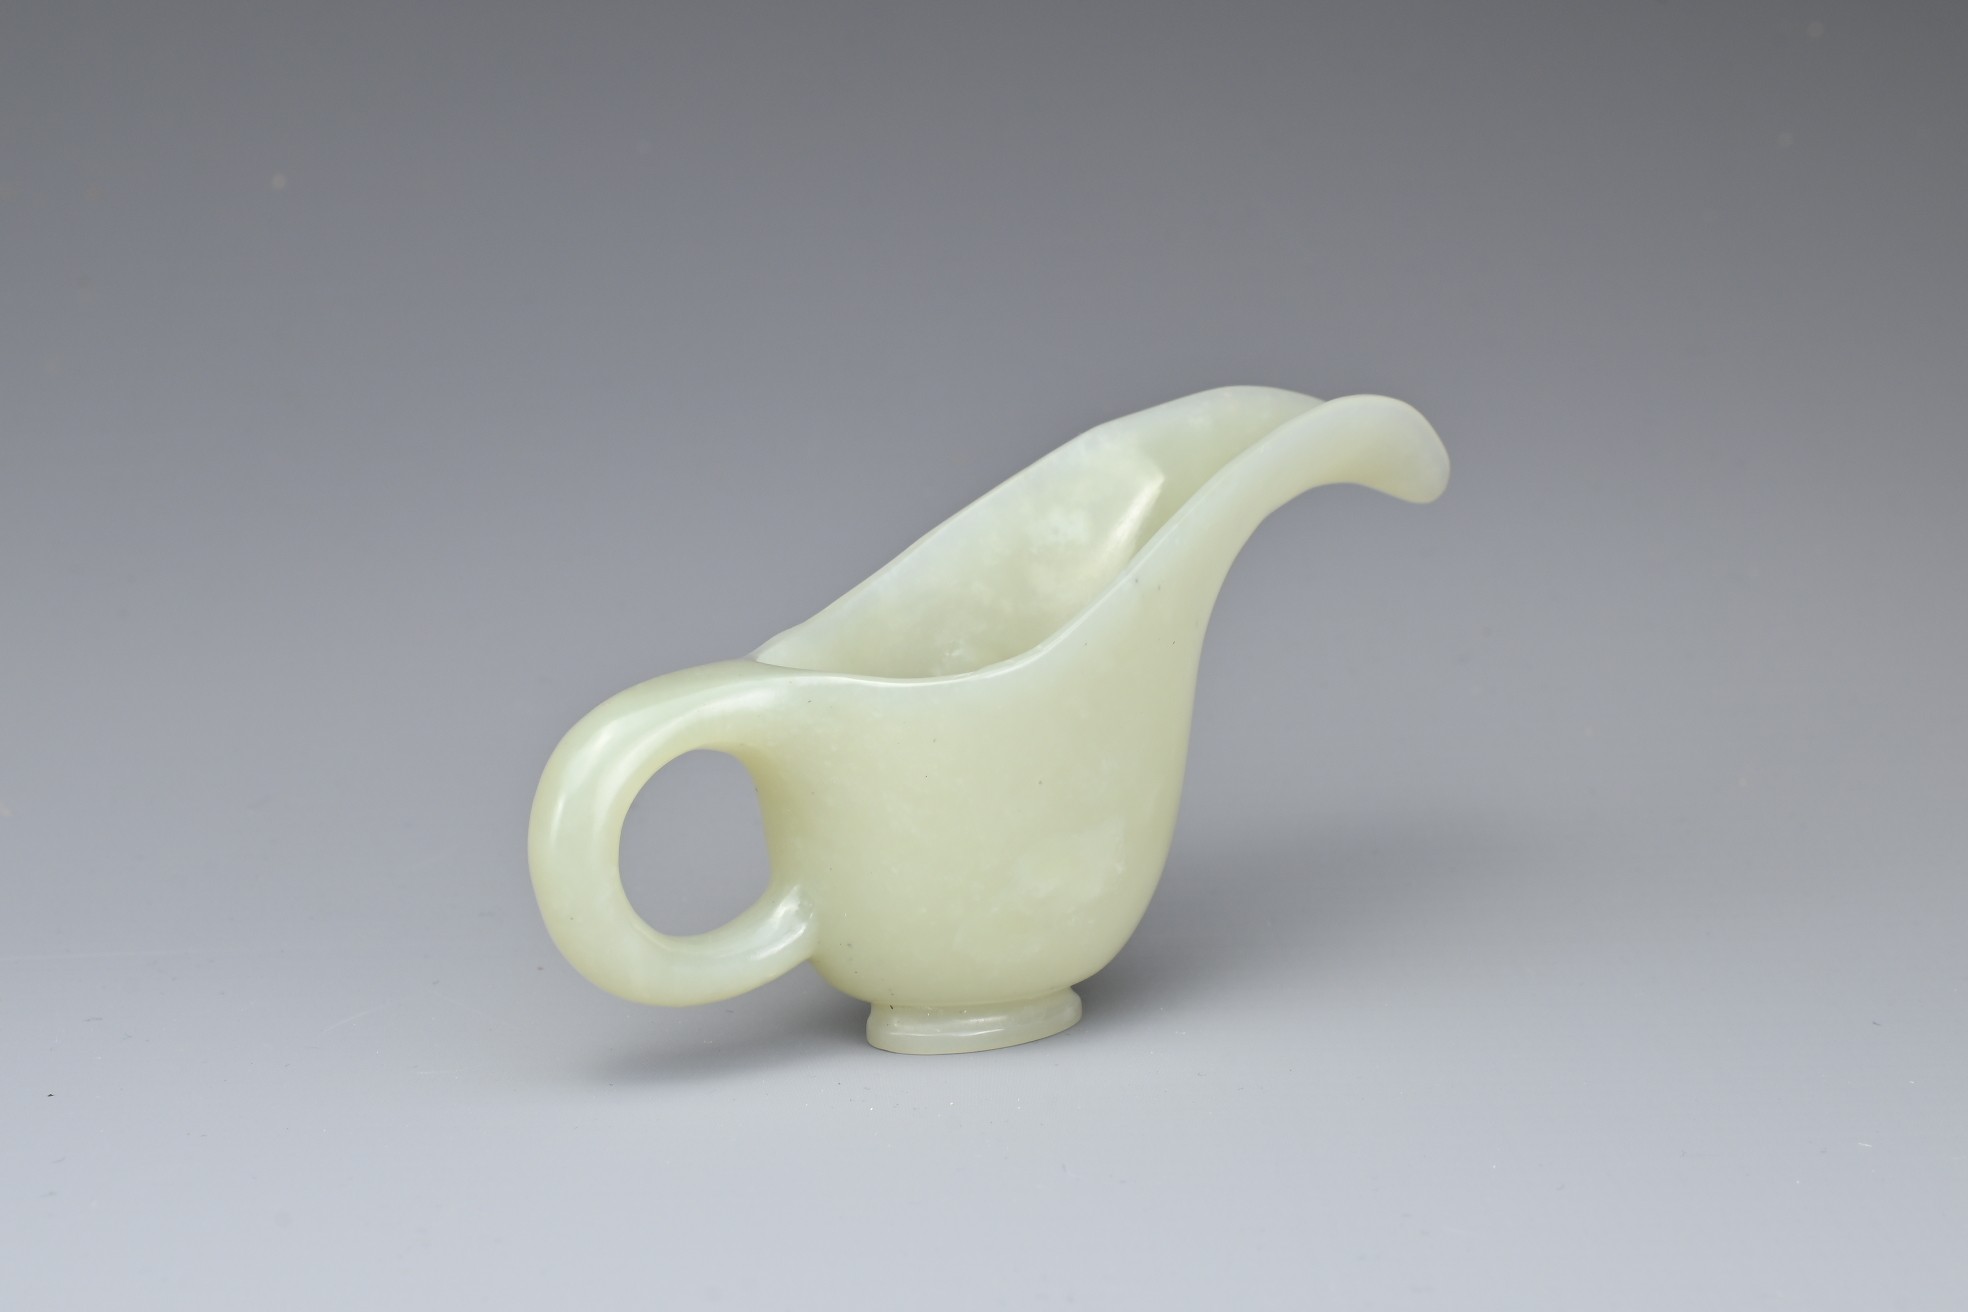 A CHINESE PALE CELADON JADE CUP. Of slender form with a looped handle and curved spout. 10.5cm - Image 4 of 7